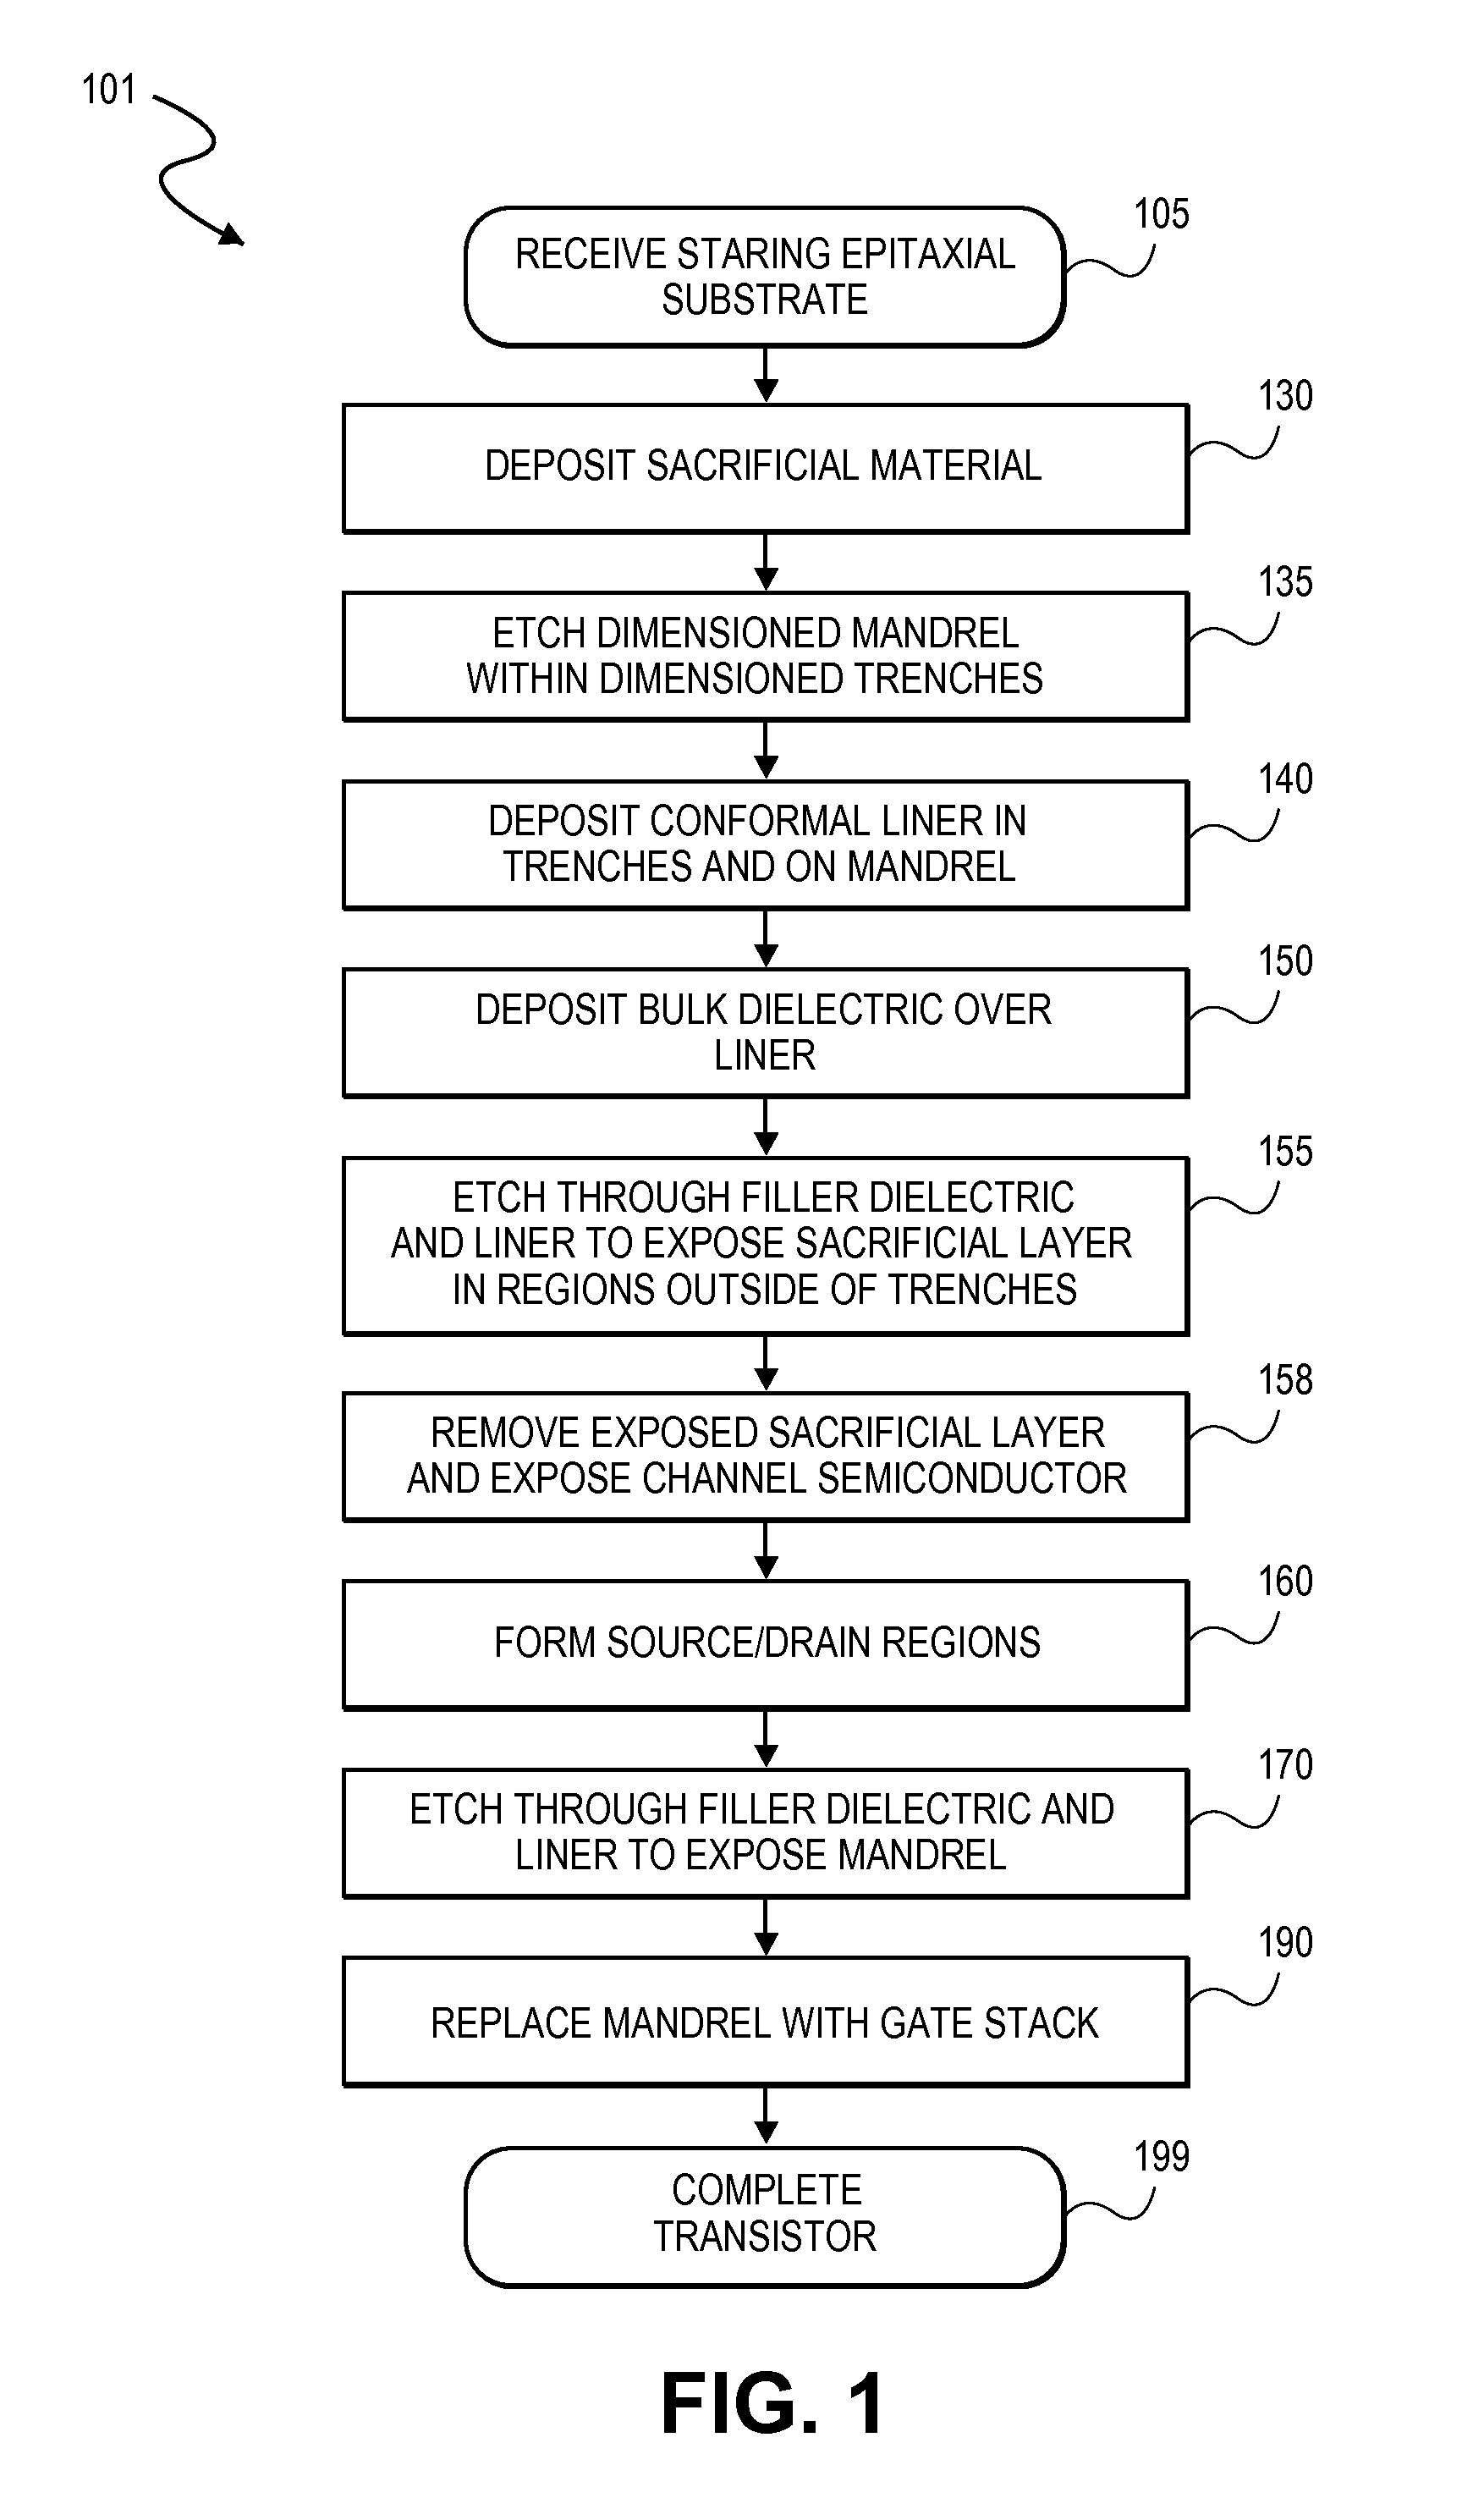 Self-aligned structures and methods for asymmetric GAN transistors & enhancement mode operation